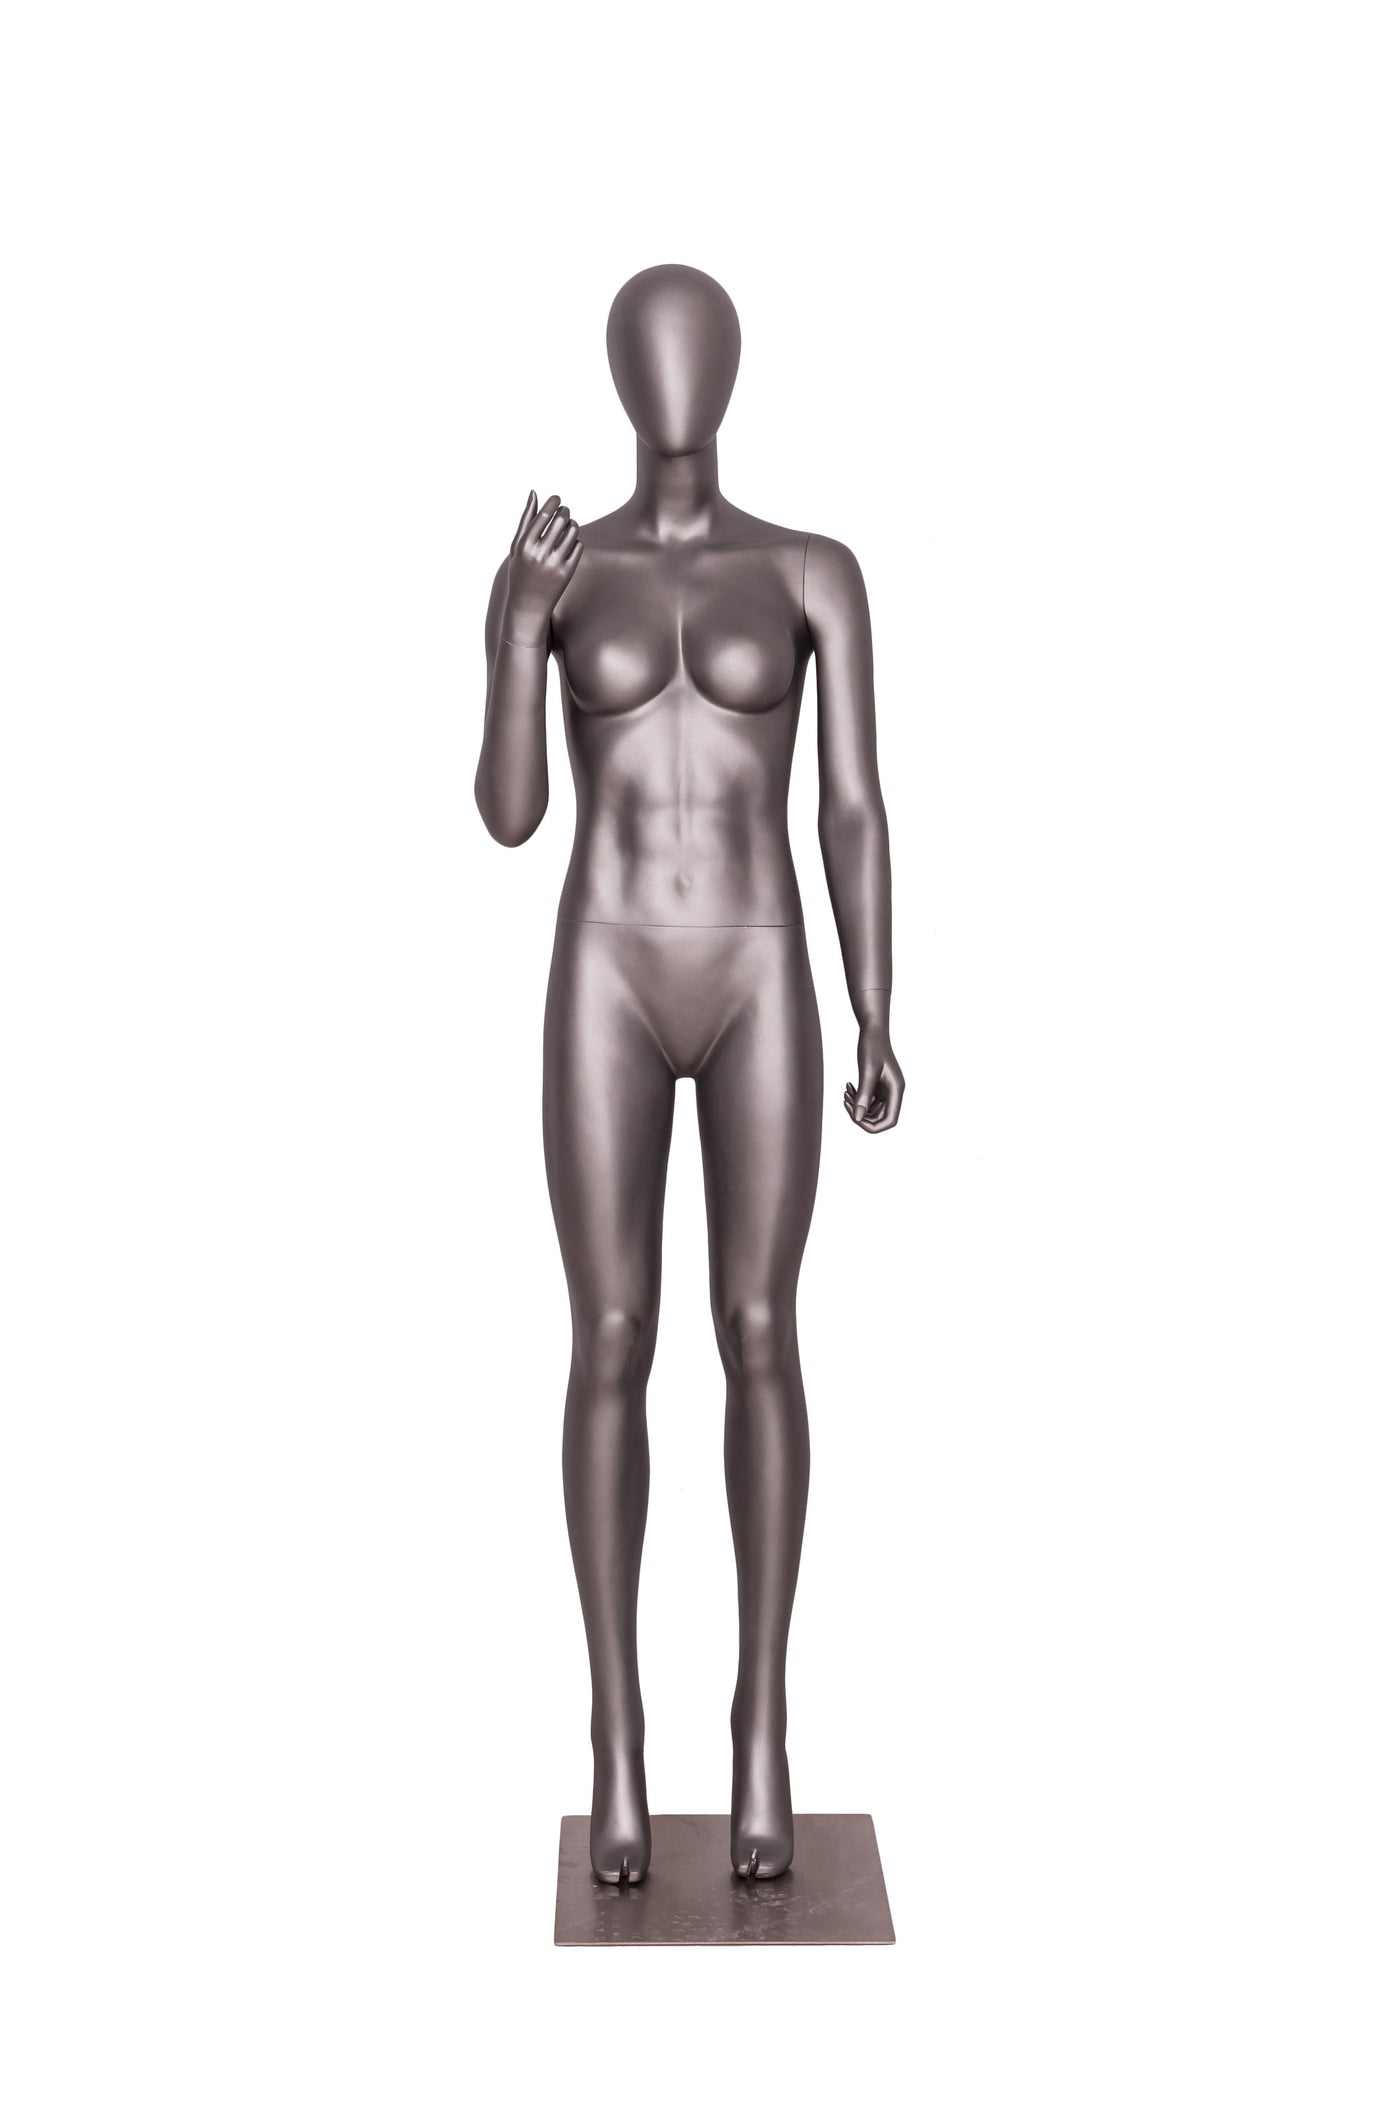 Sports Female Mannequin In Exercising Pose 2: Matte Grey